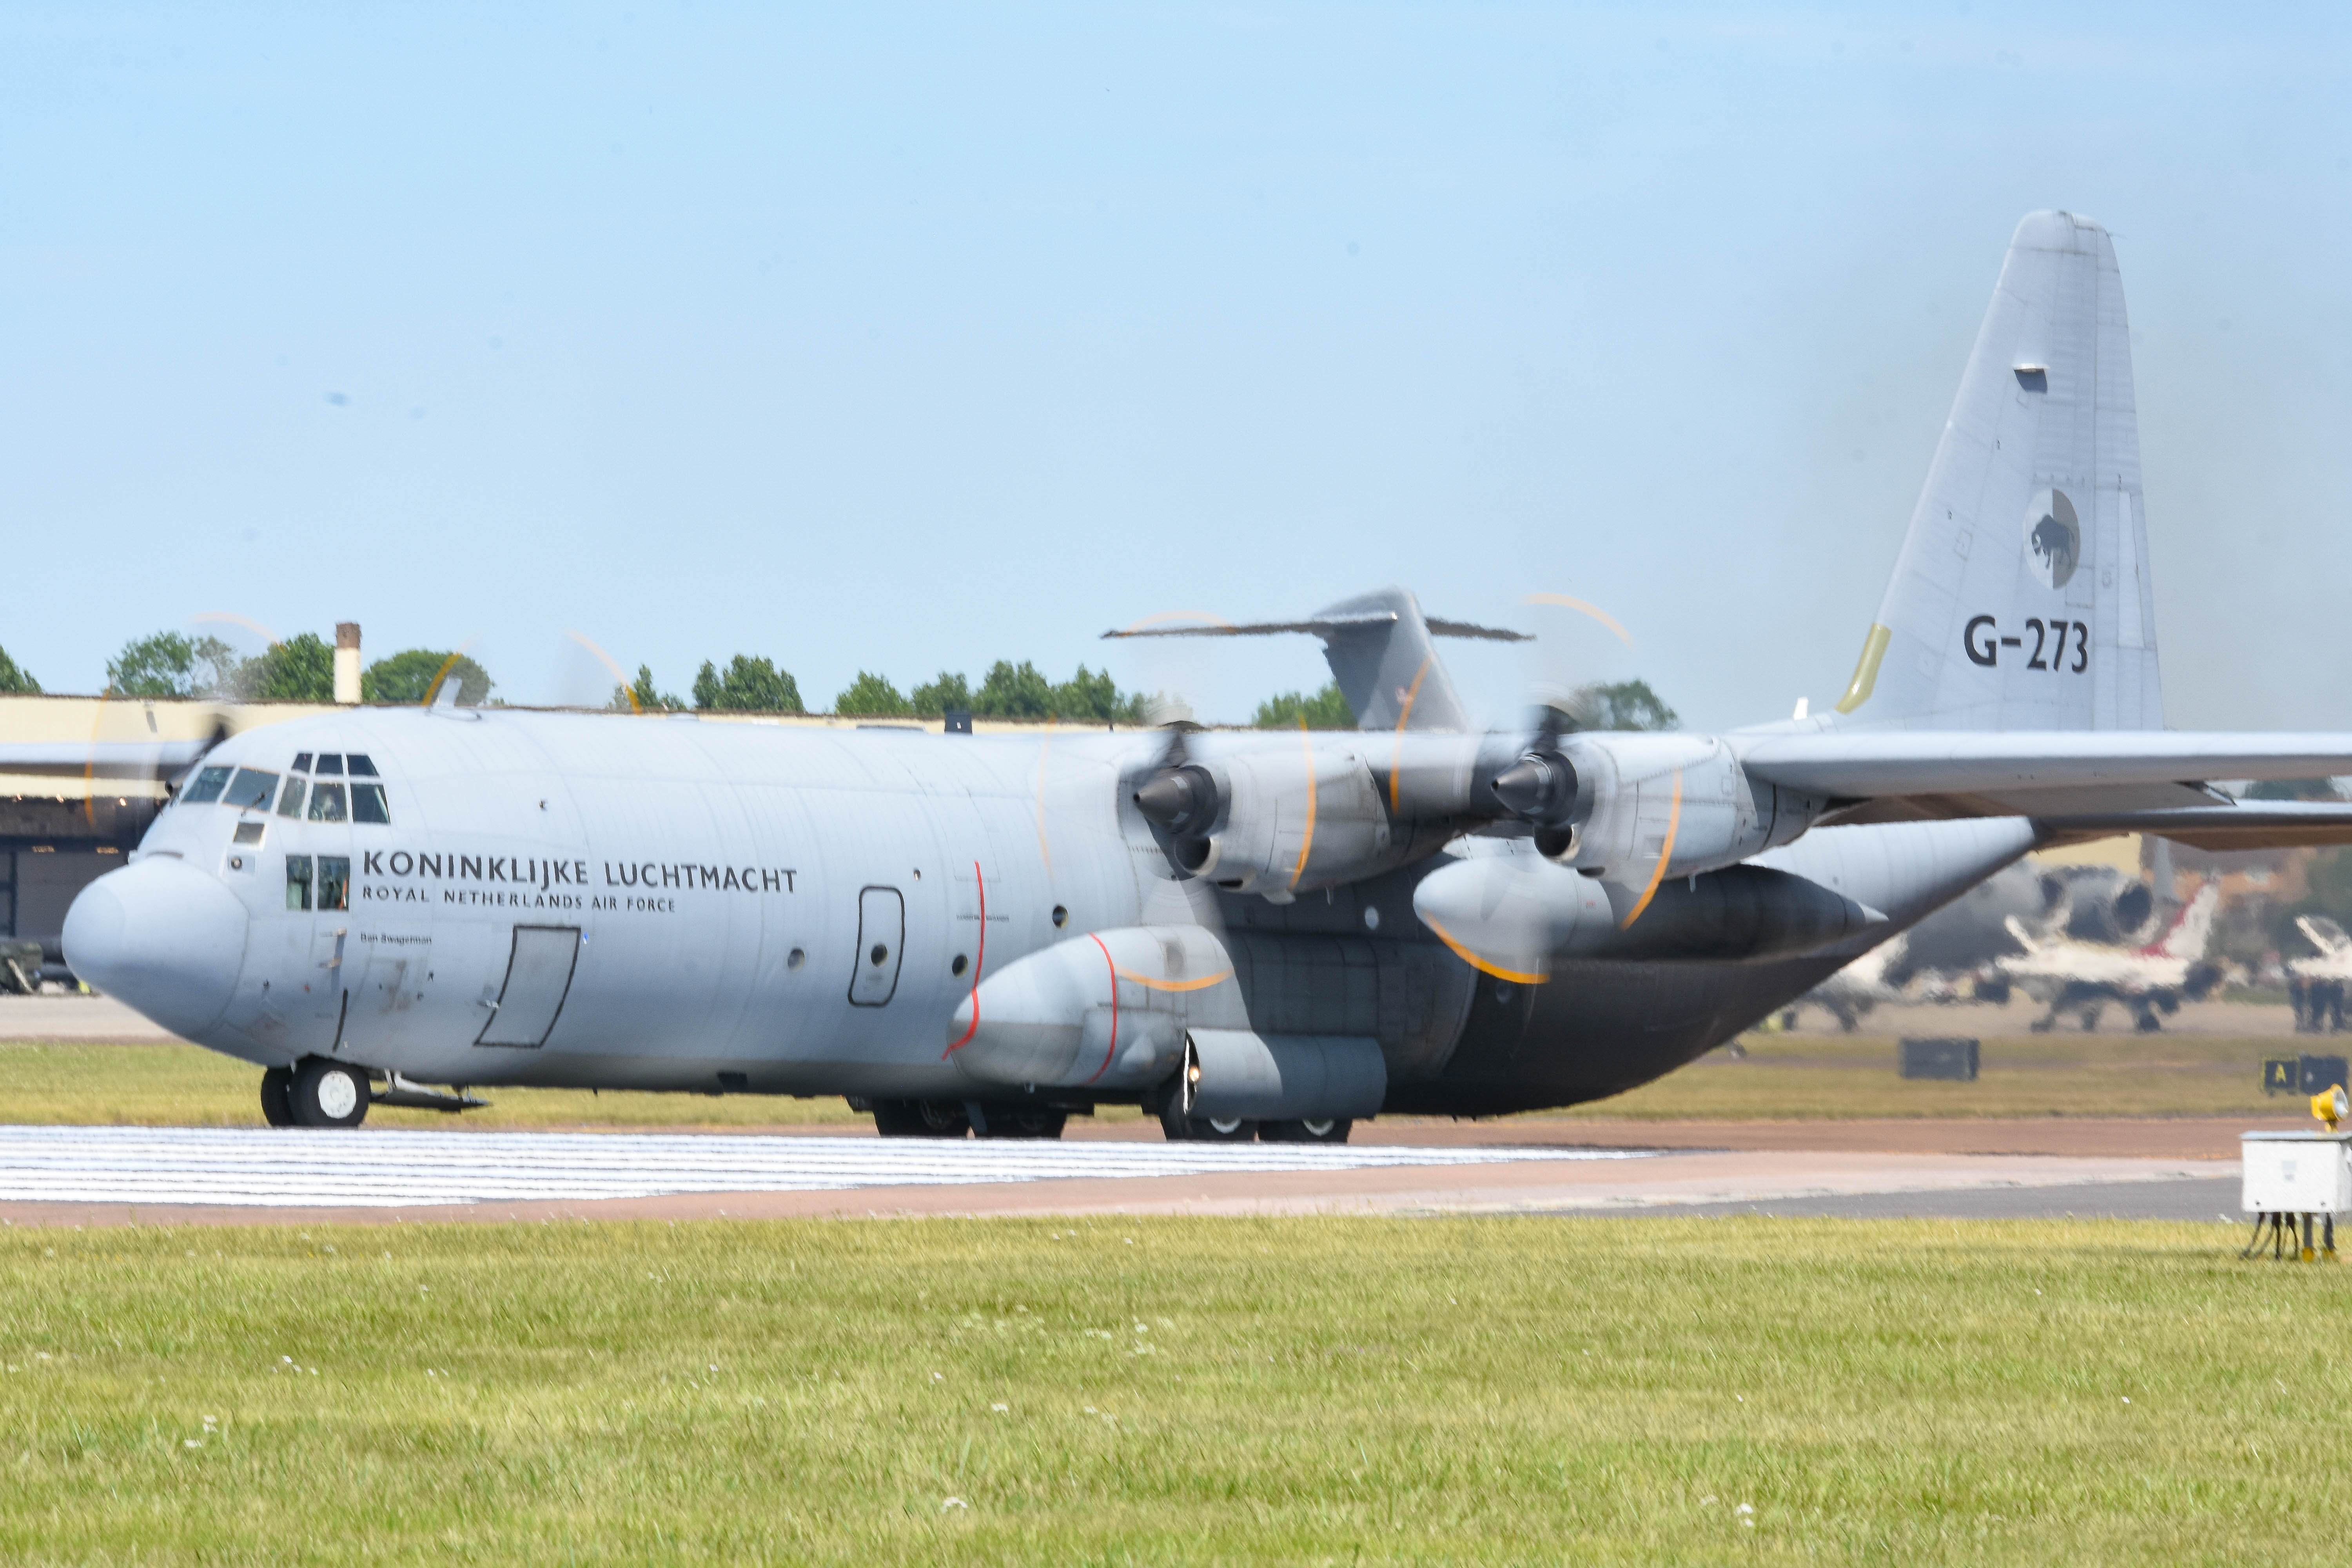 G-273/G273 RNlAF - Royal Netherlands Air Force Lockheed C-130H-30 Hercules Photo by colinw - AVSpotters.com